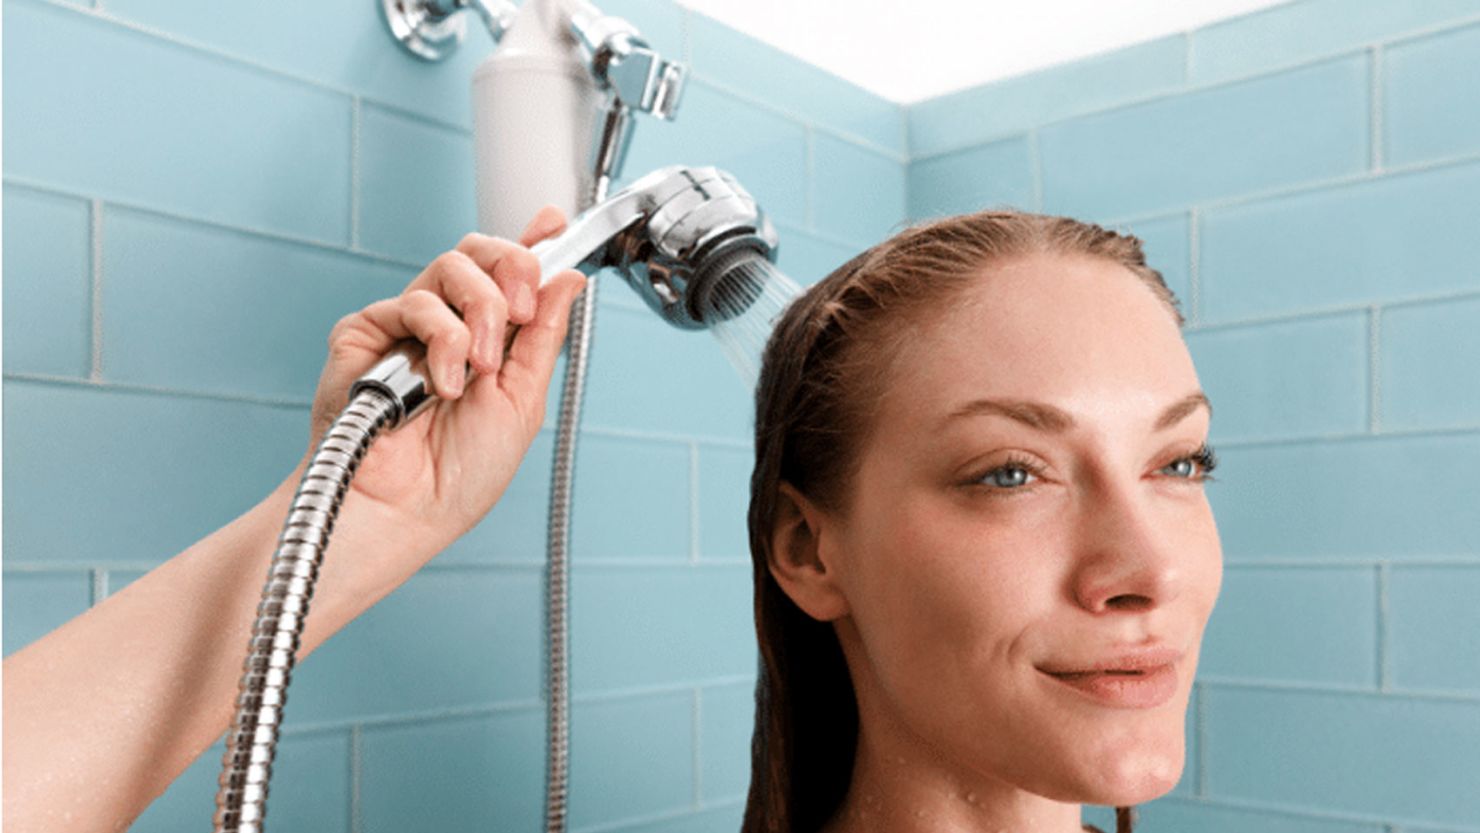 6 best shower filters for hair care of 2022